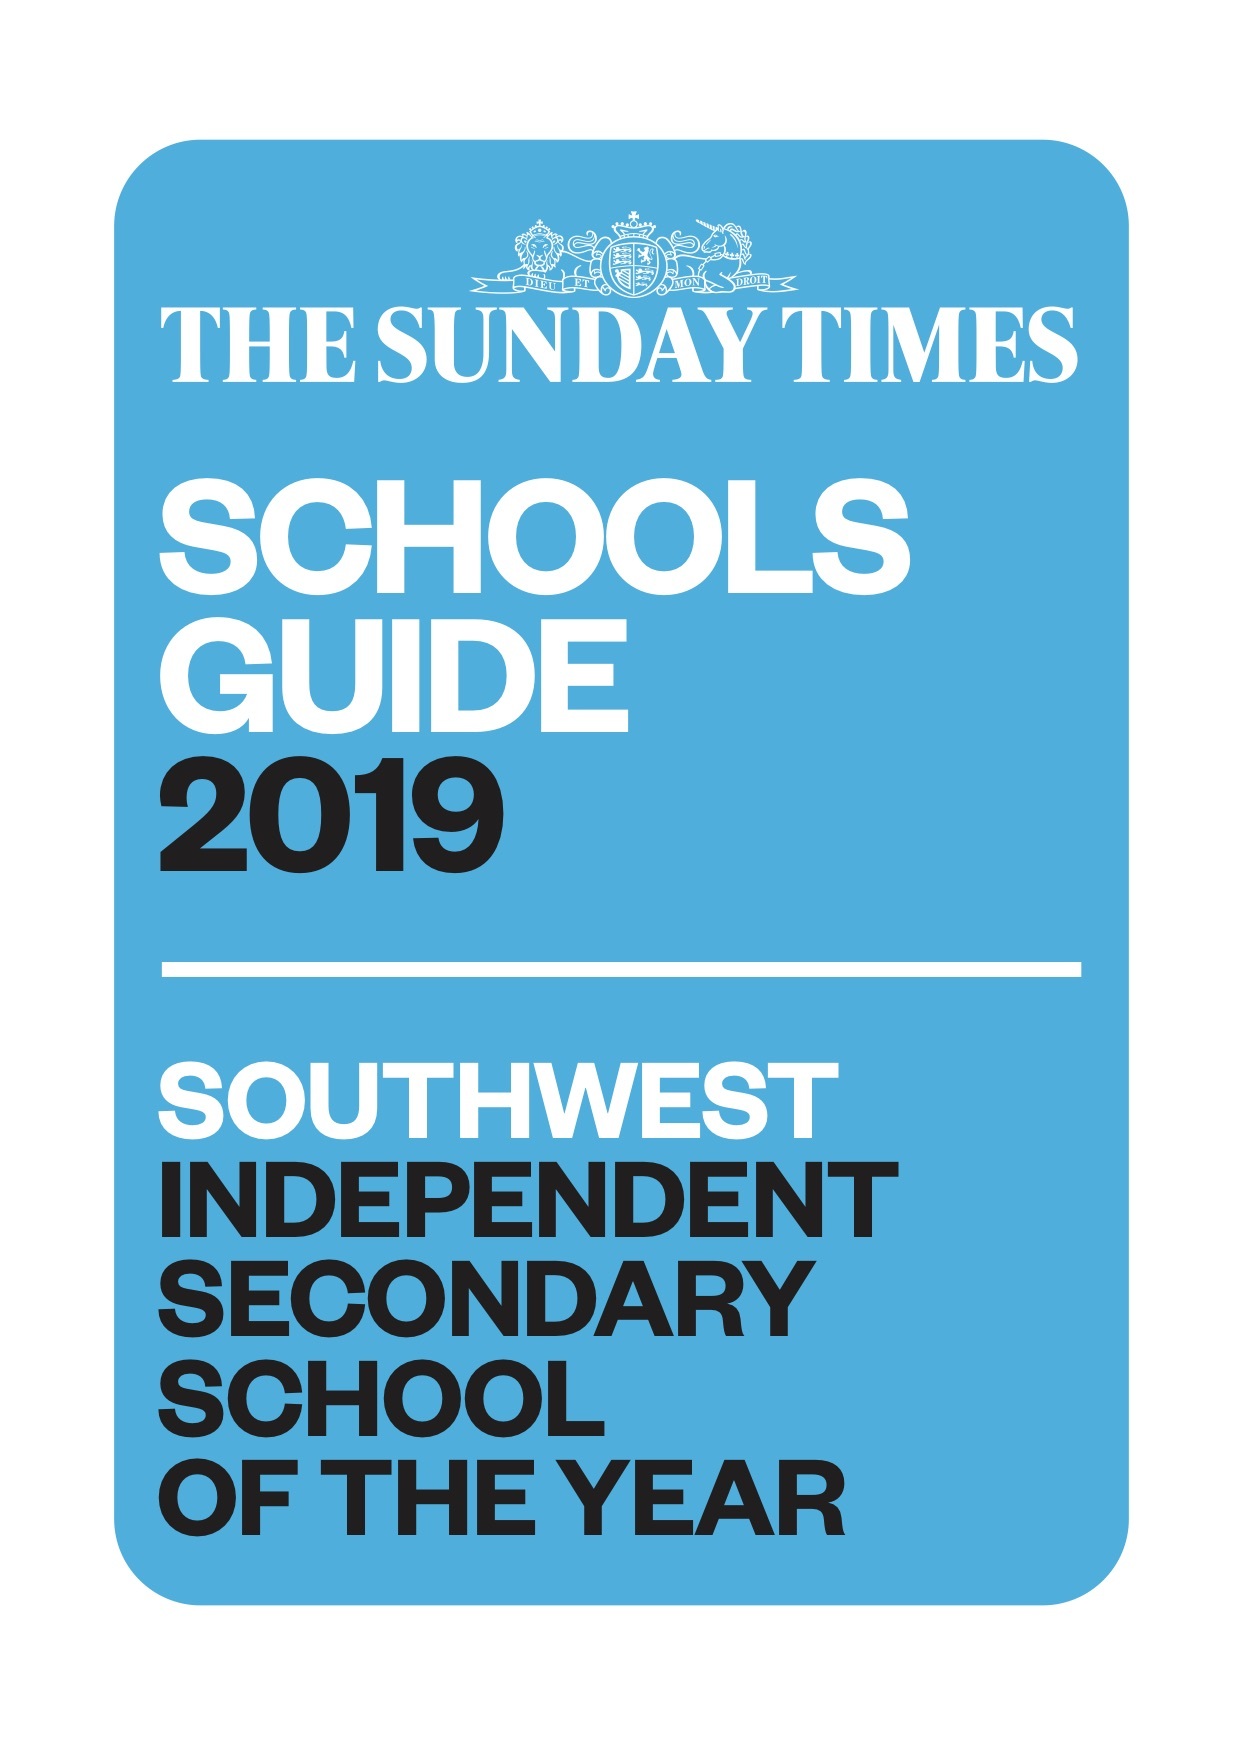 Southwest Independent Secondary School Of The Year